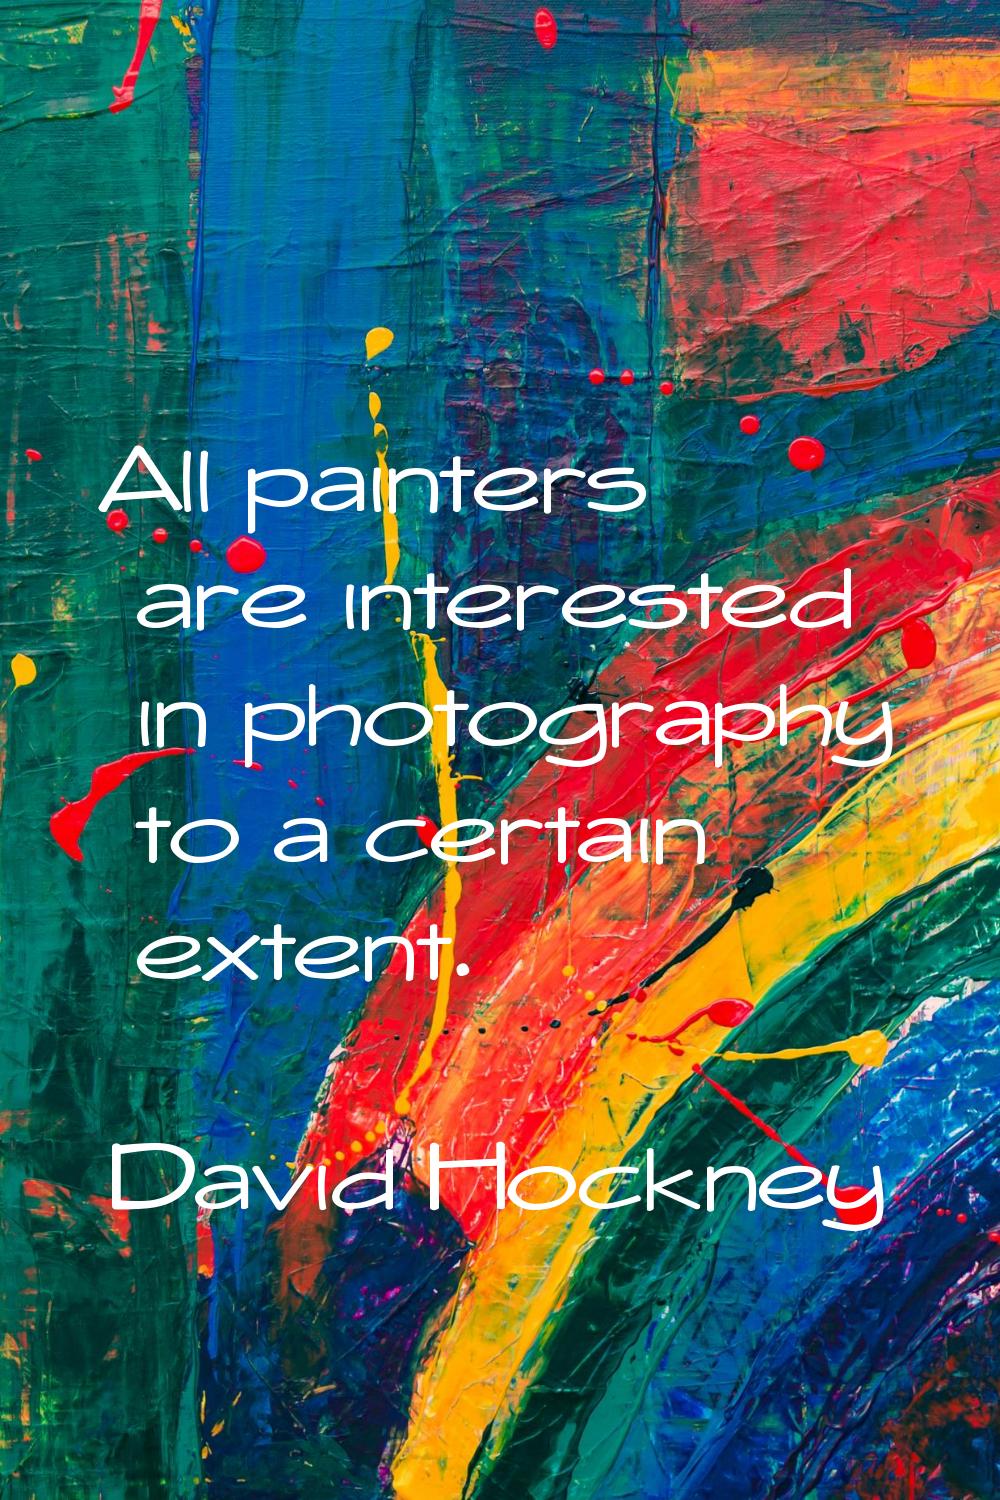 All painters are interested in photography to a certain extent.